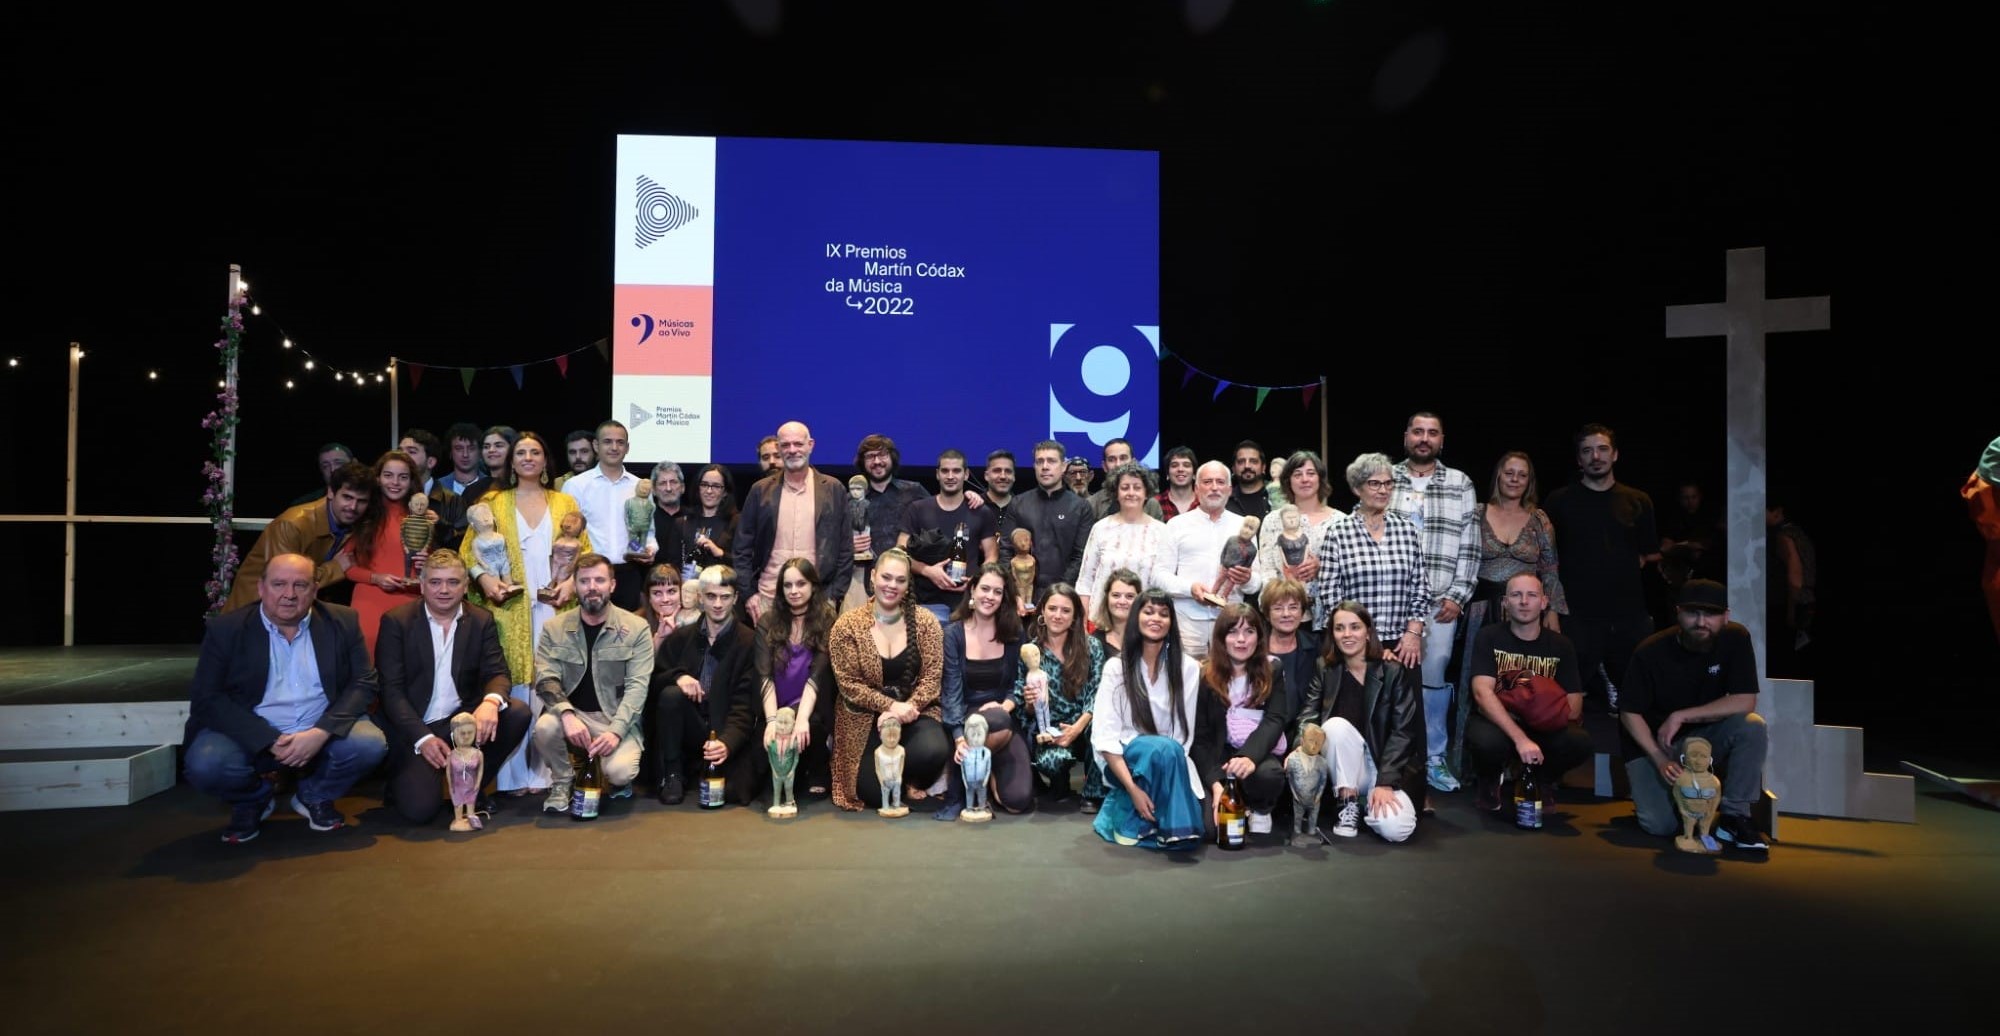 The spirit of verbena pervaded the gala of the 9th Martín Códax Music Awards